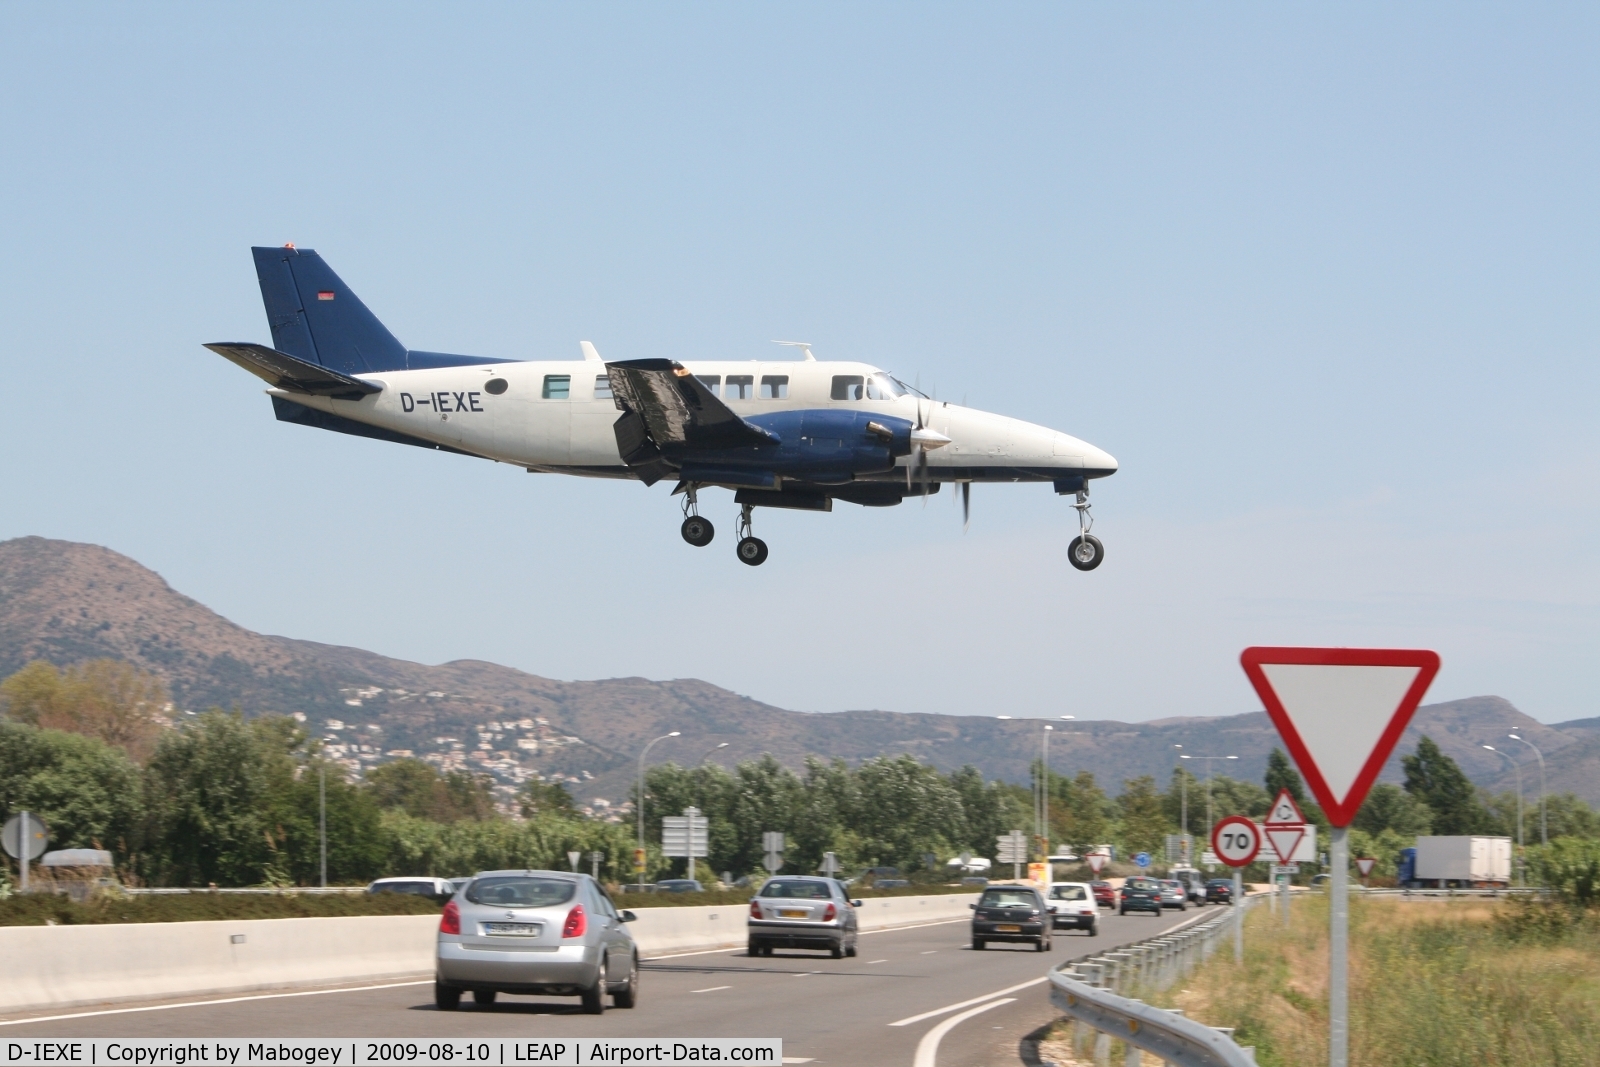 D-IEXE, 1969 Beech 99 Airliner C/N U-46, Landing at LEAP (Ampuria Brava) after delevering skydivers at 12500ft.